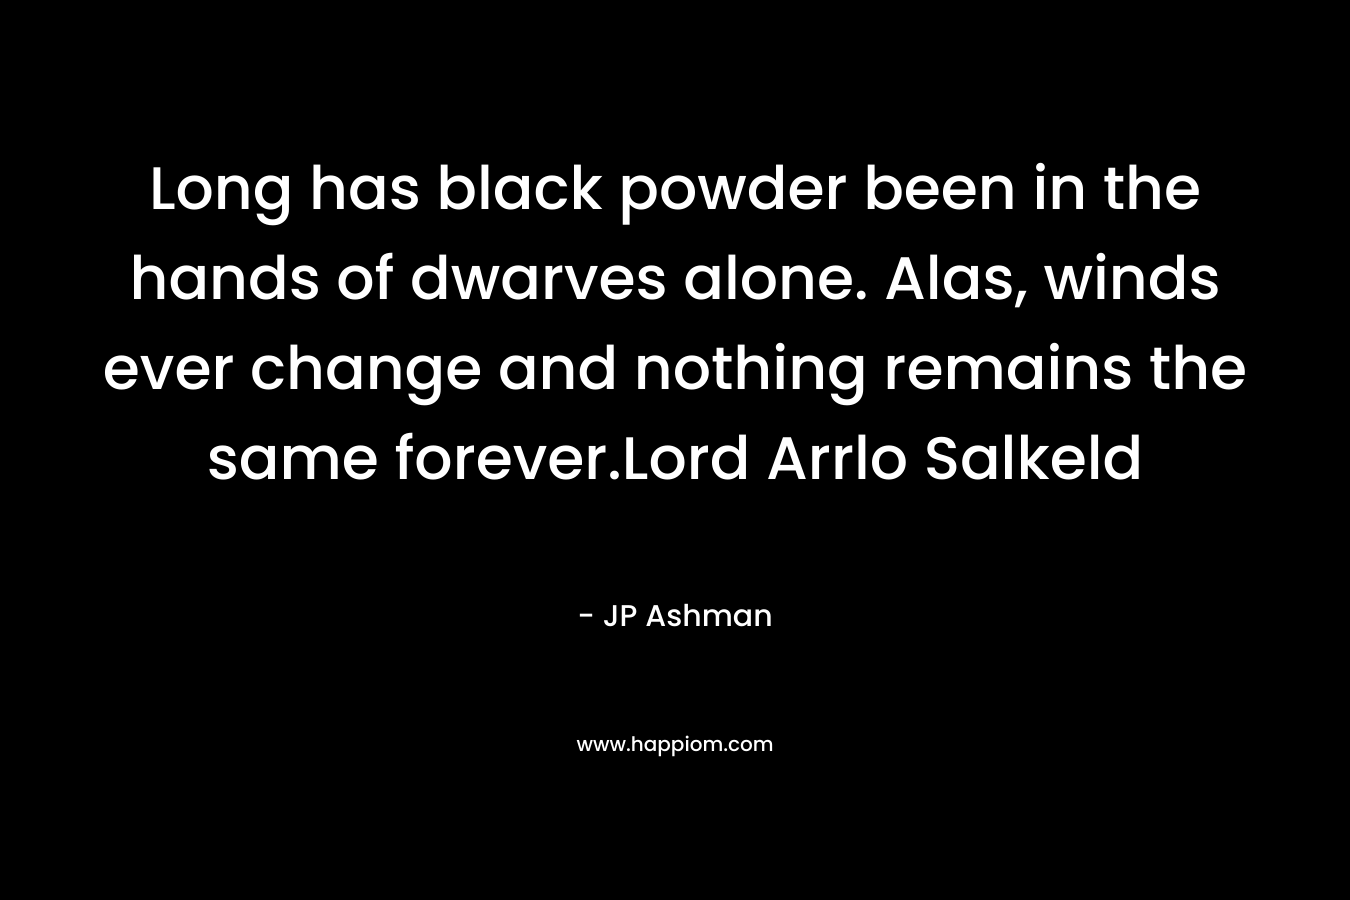 Long has black powder been in the hands of dwarves alone. Alas, winds ever change and nothing remains the same forever.Lord Arrlo Salkeld